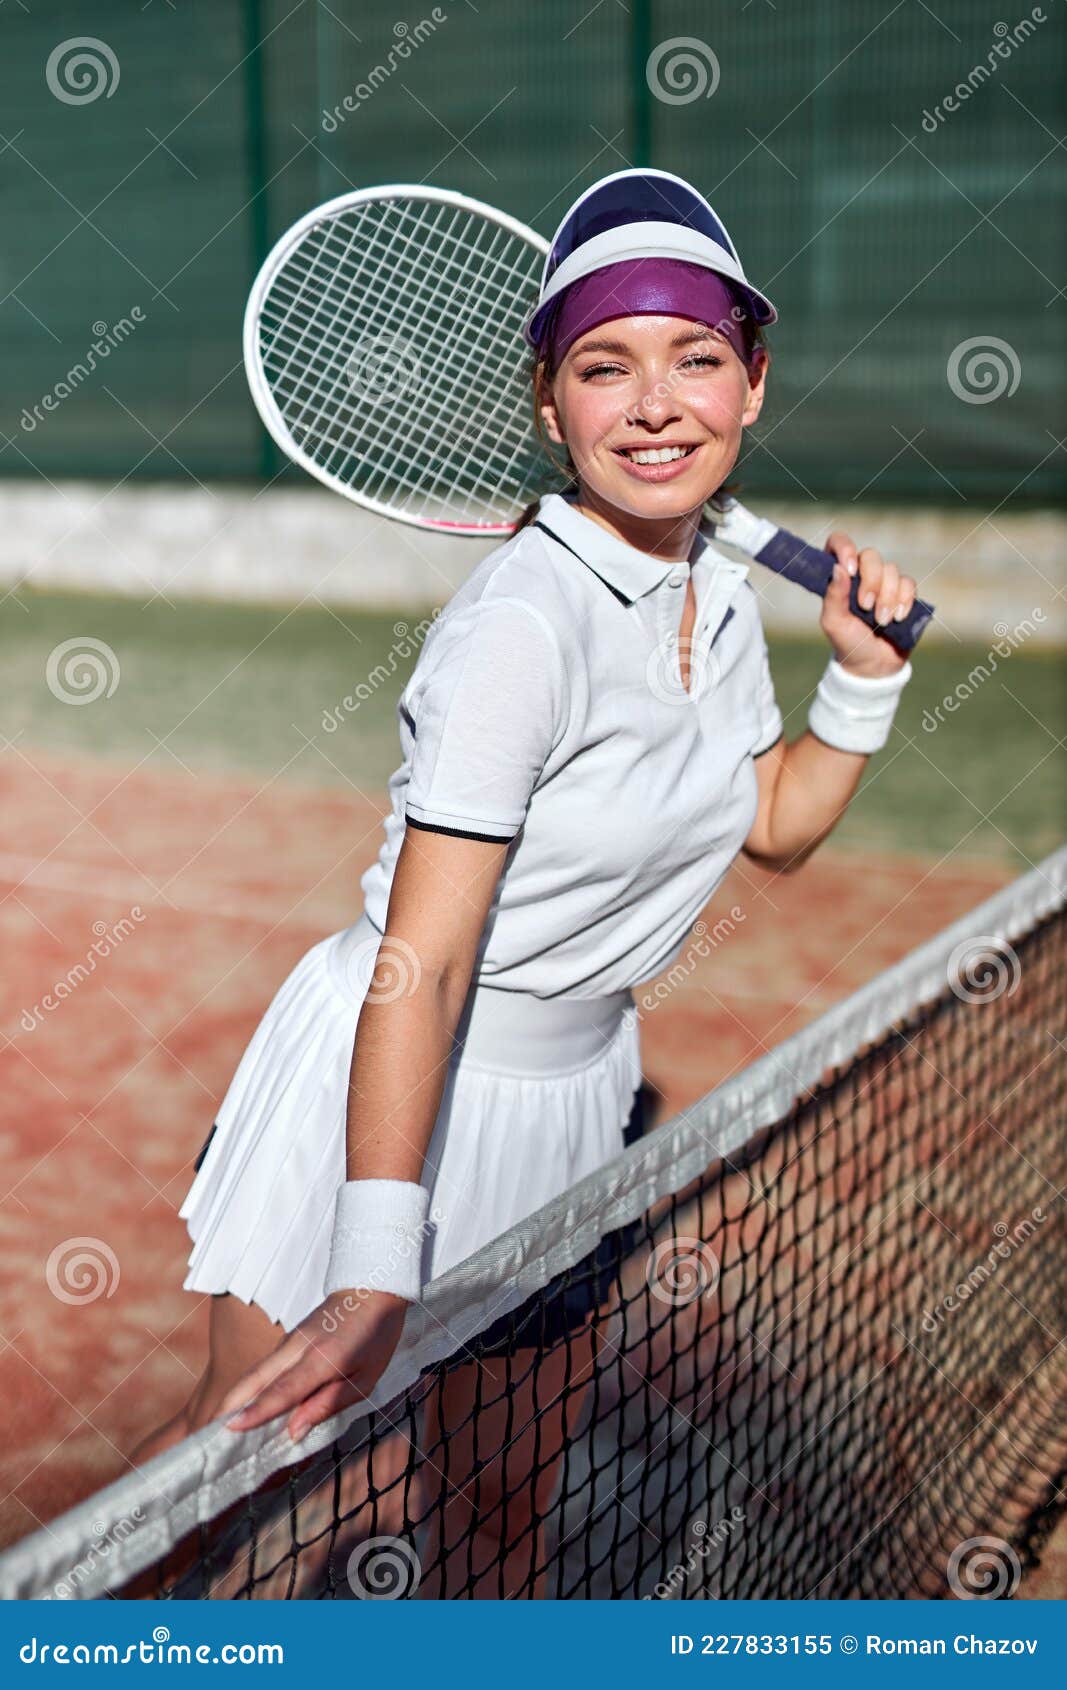 Beautiful Young Woman In Sports Clothing Holding Tennis Racket On